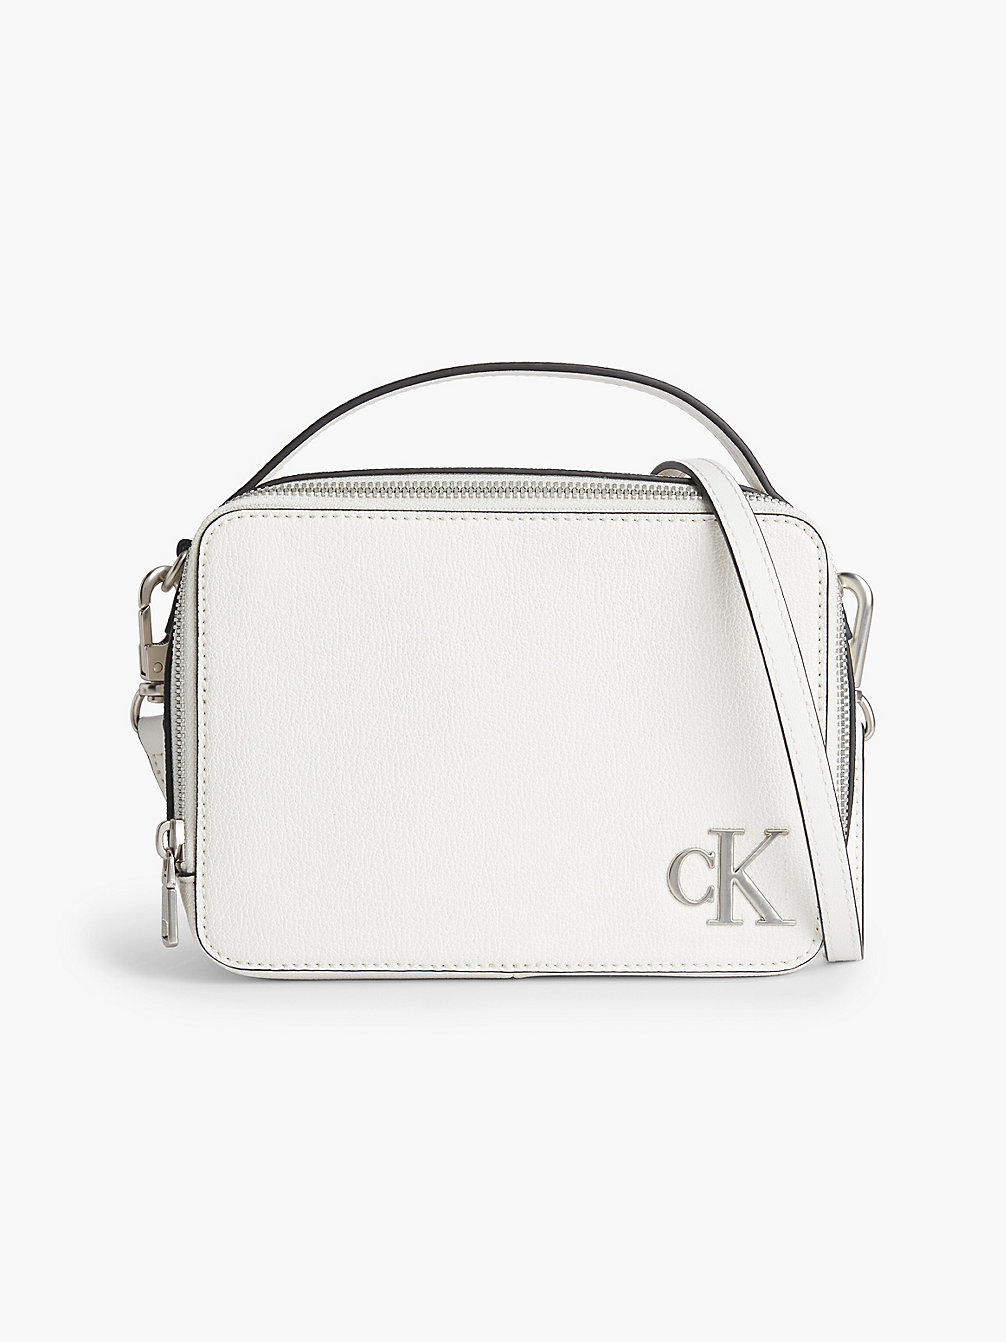 IVORY Recycled Crossbody Bag undefined women Calvin Klein